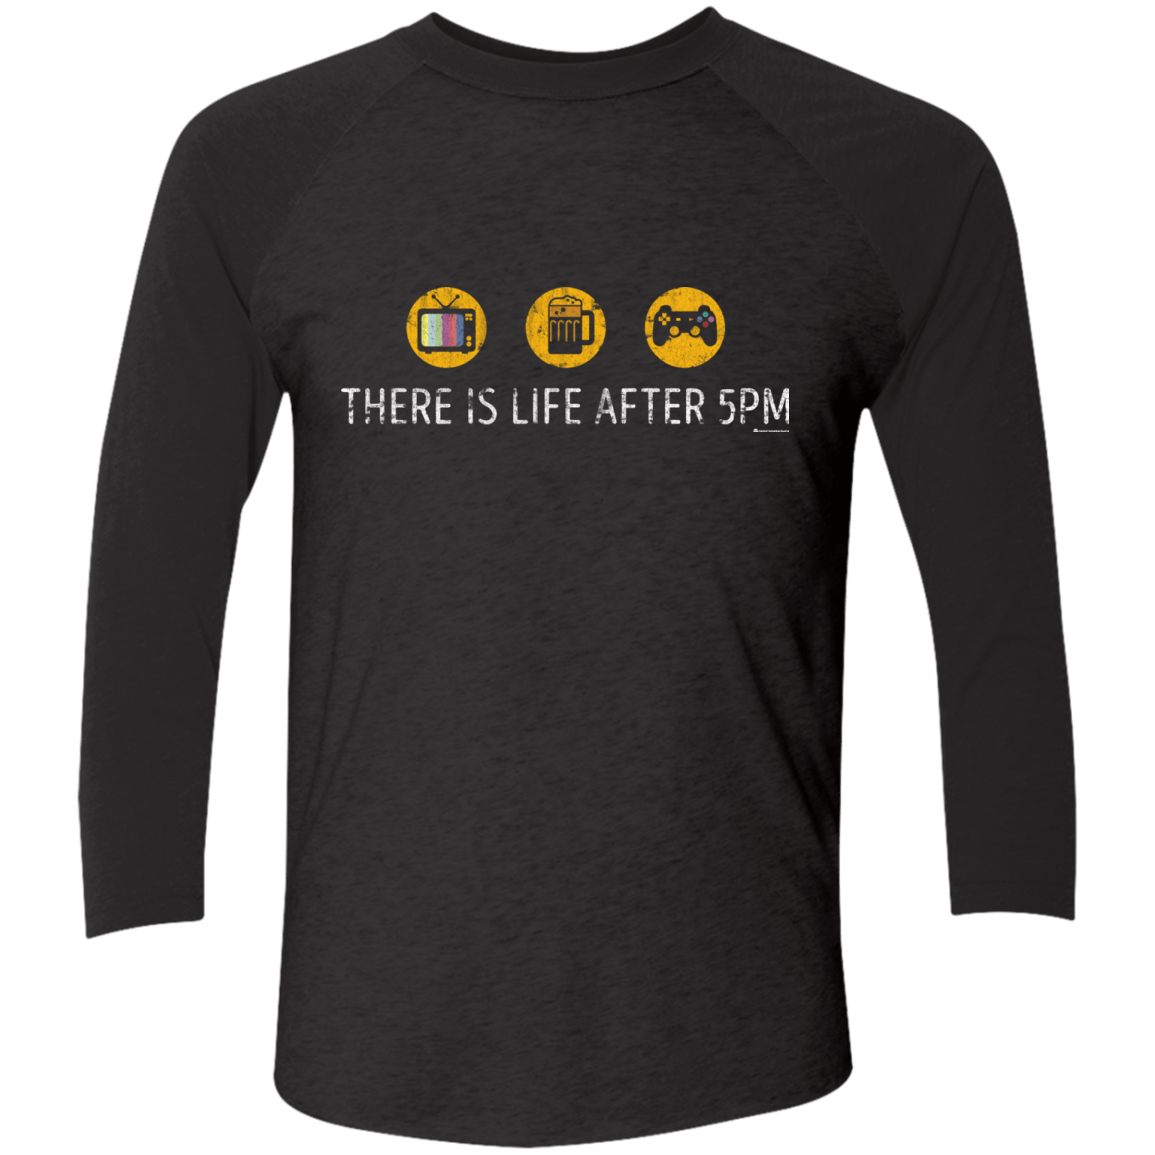 T-Shirts Vintage Black/Vintage Black / X-Small There Is Life After 5PM Men's Triblend 3/4 Sleeve